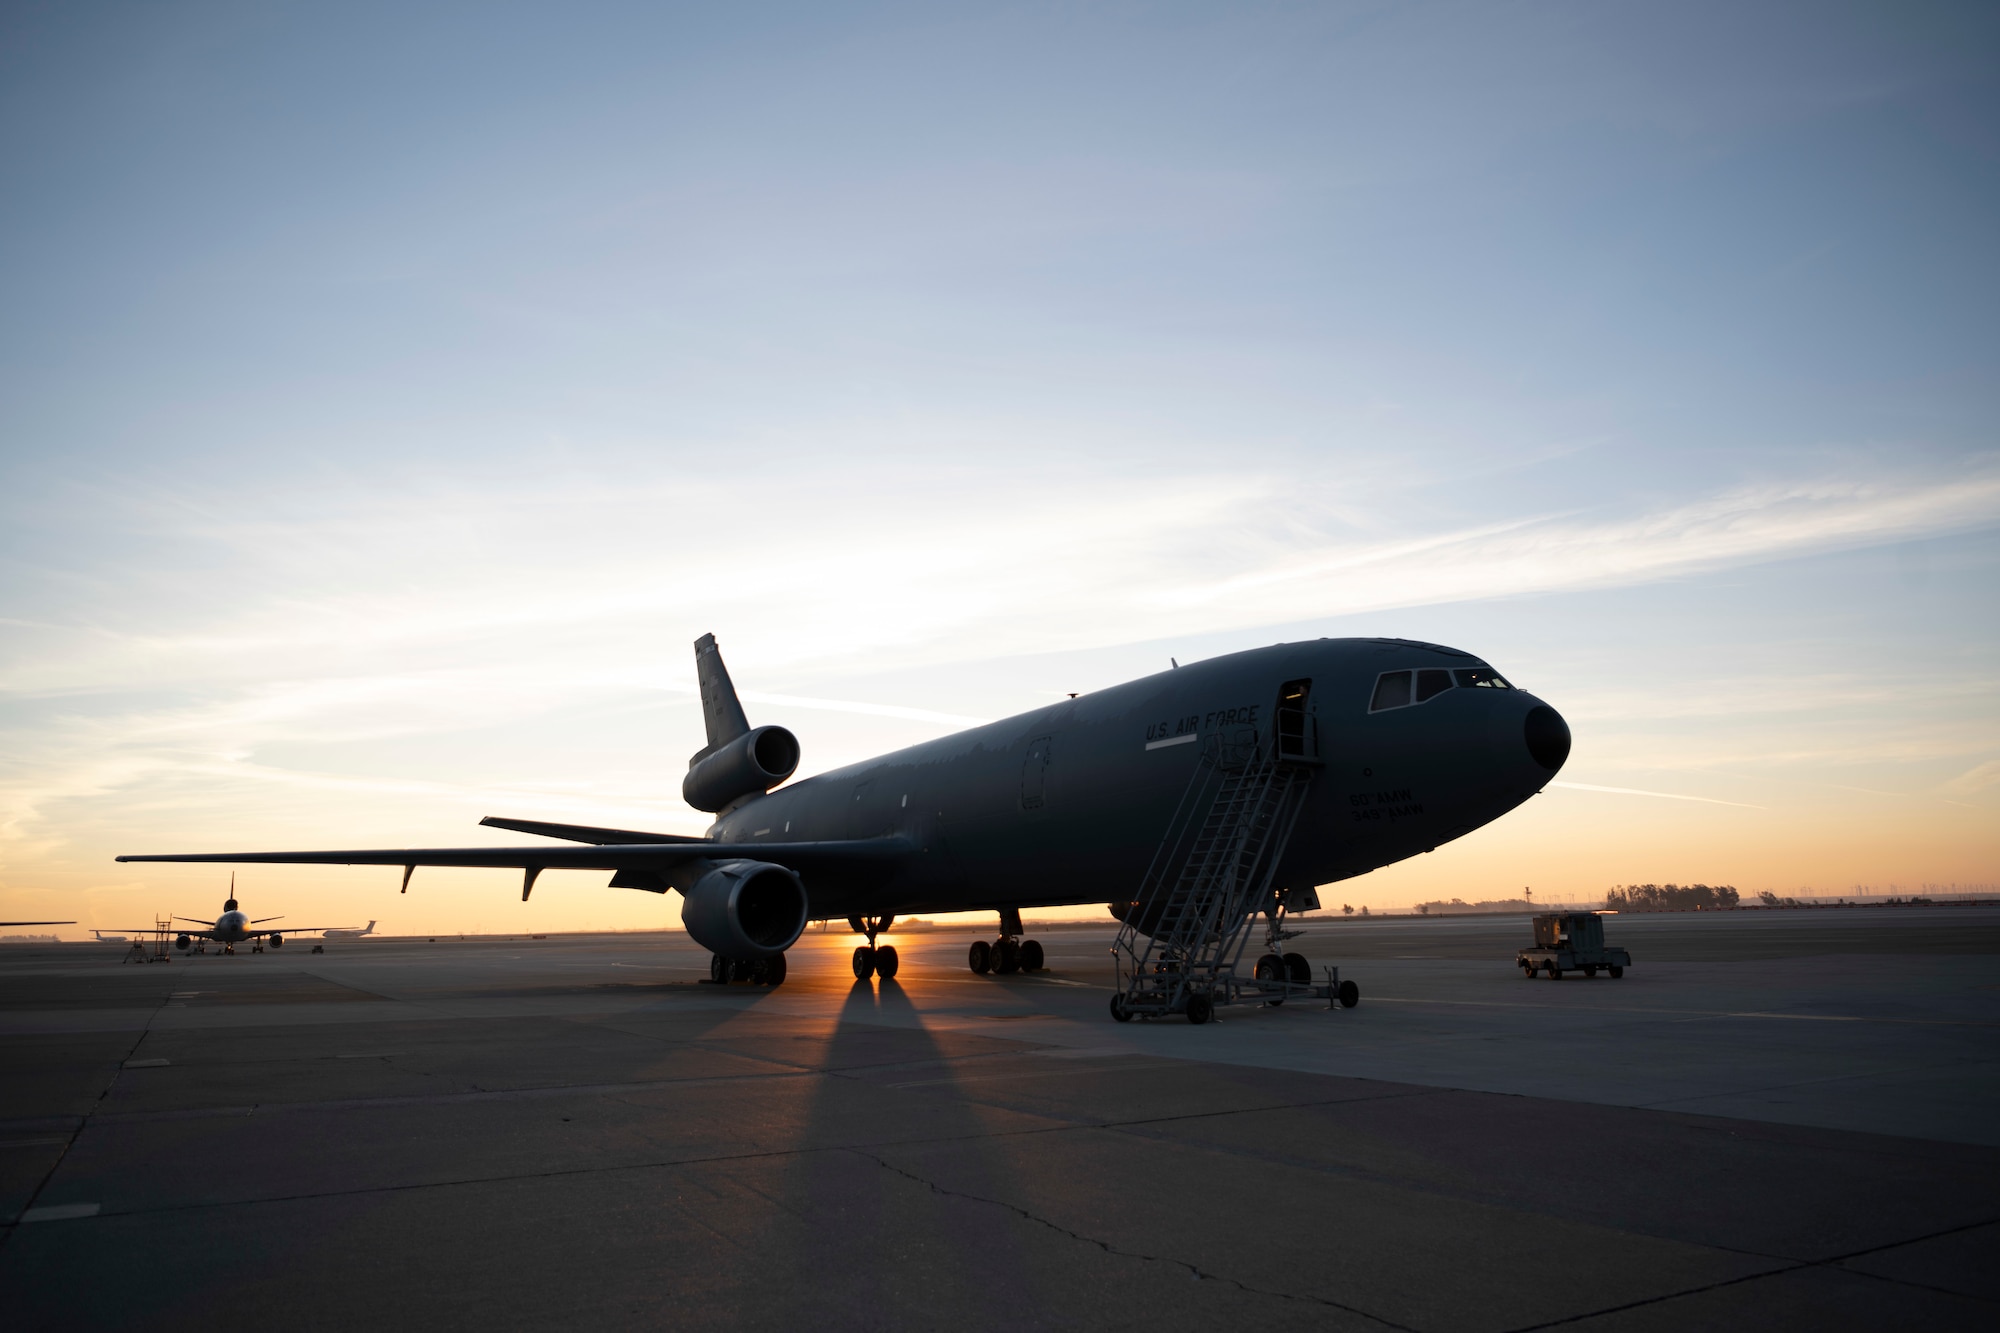 A KC-10 Extender is parked on the flight line Nov. 16, 2020, at Travis Air Force Base, California. Thirteen aircrew members from the 6th Air Refueling Squadron participated in a basewide exercise during their flight on the aircraft. (U.S. Air Force photo by Airman 1st Class Alexander Merchak)